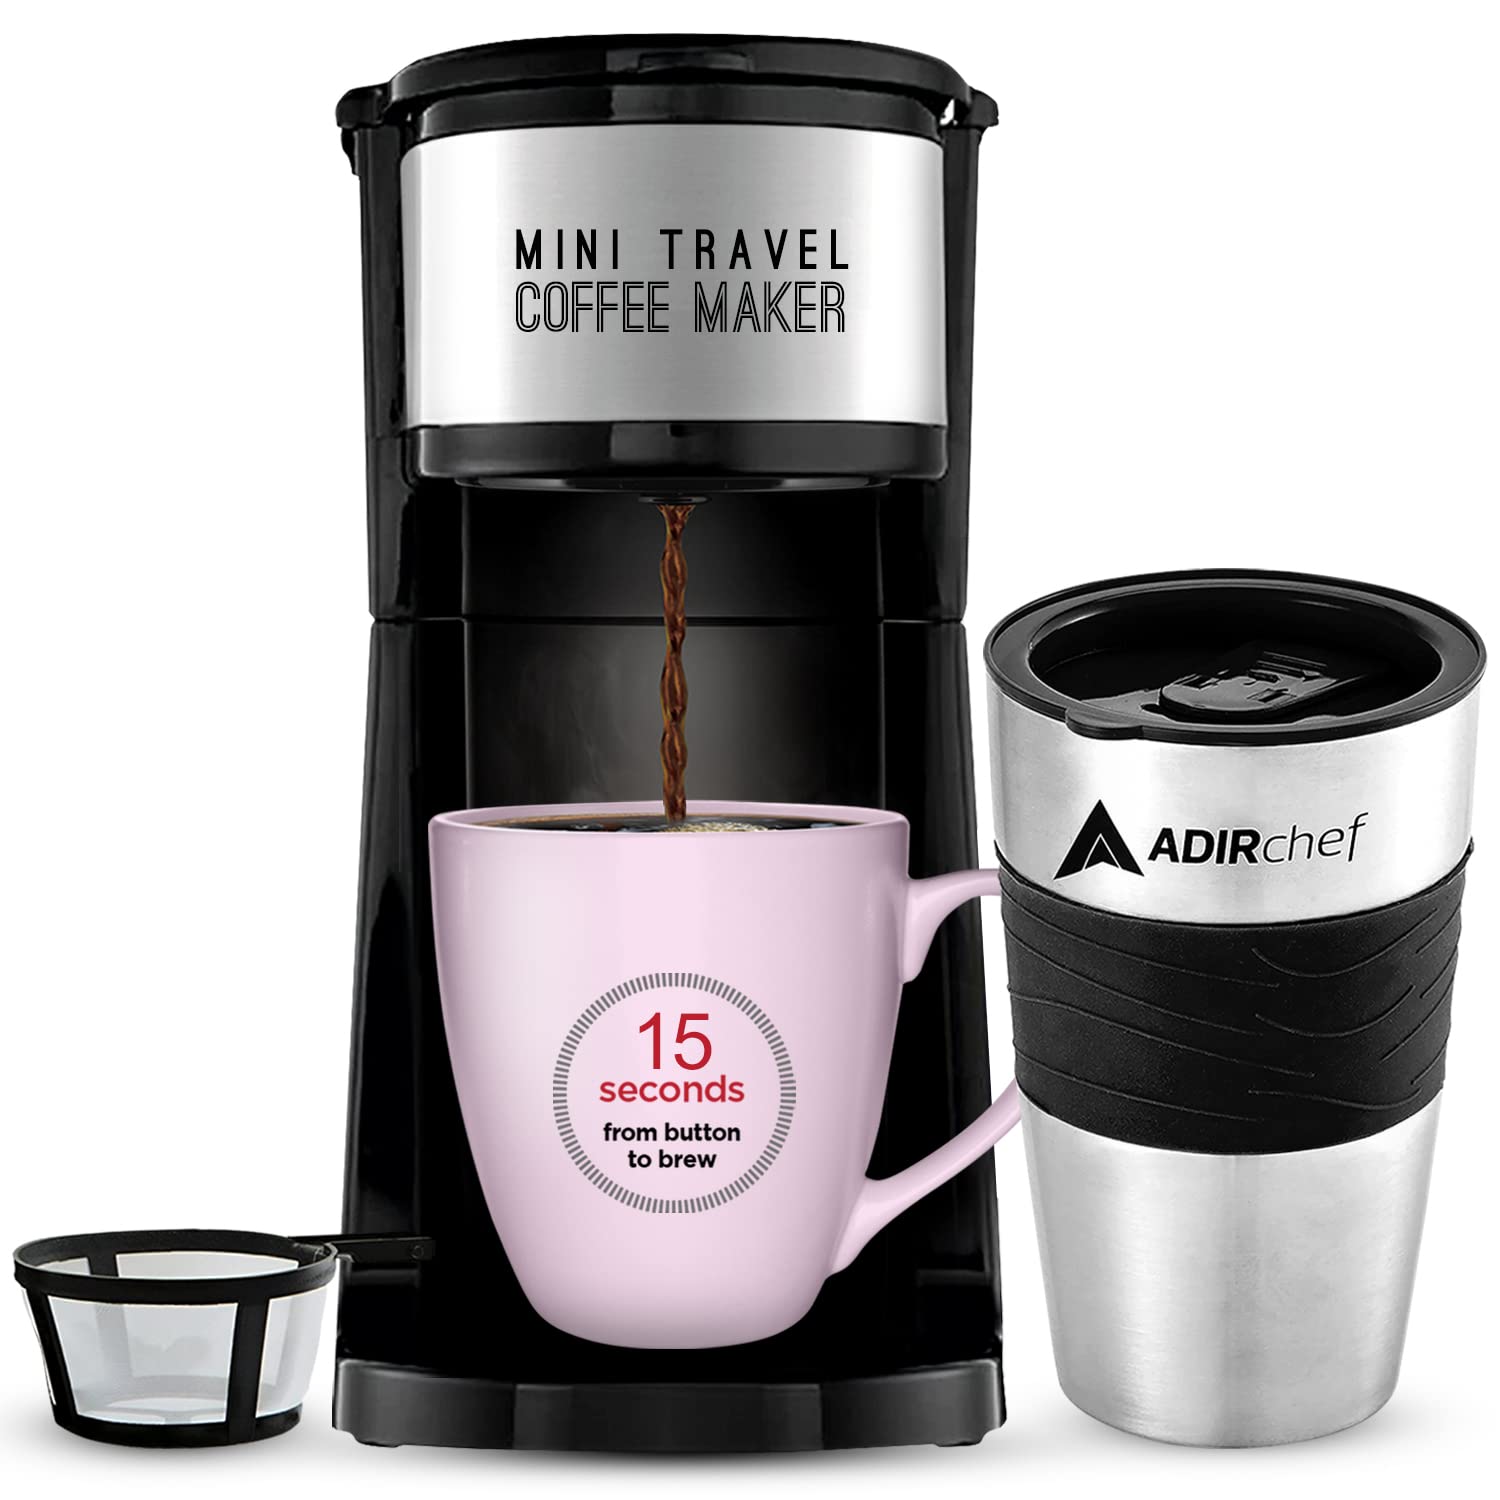 AdirChef Mini Travel Single Serve Coffee Maker & 15 oz. Travel Mug Coffee Tumbler & Reusable Filter for Home, Office, Camping, Portable Small and Compact for Fathers Day Black Variation